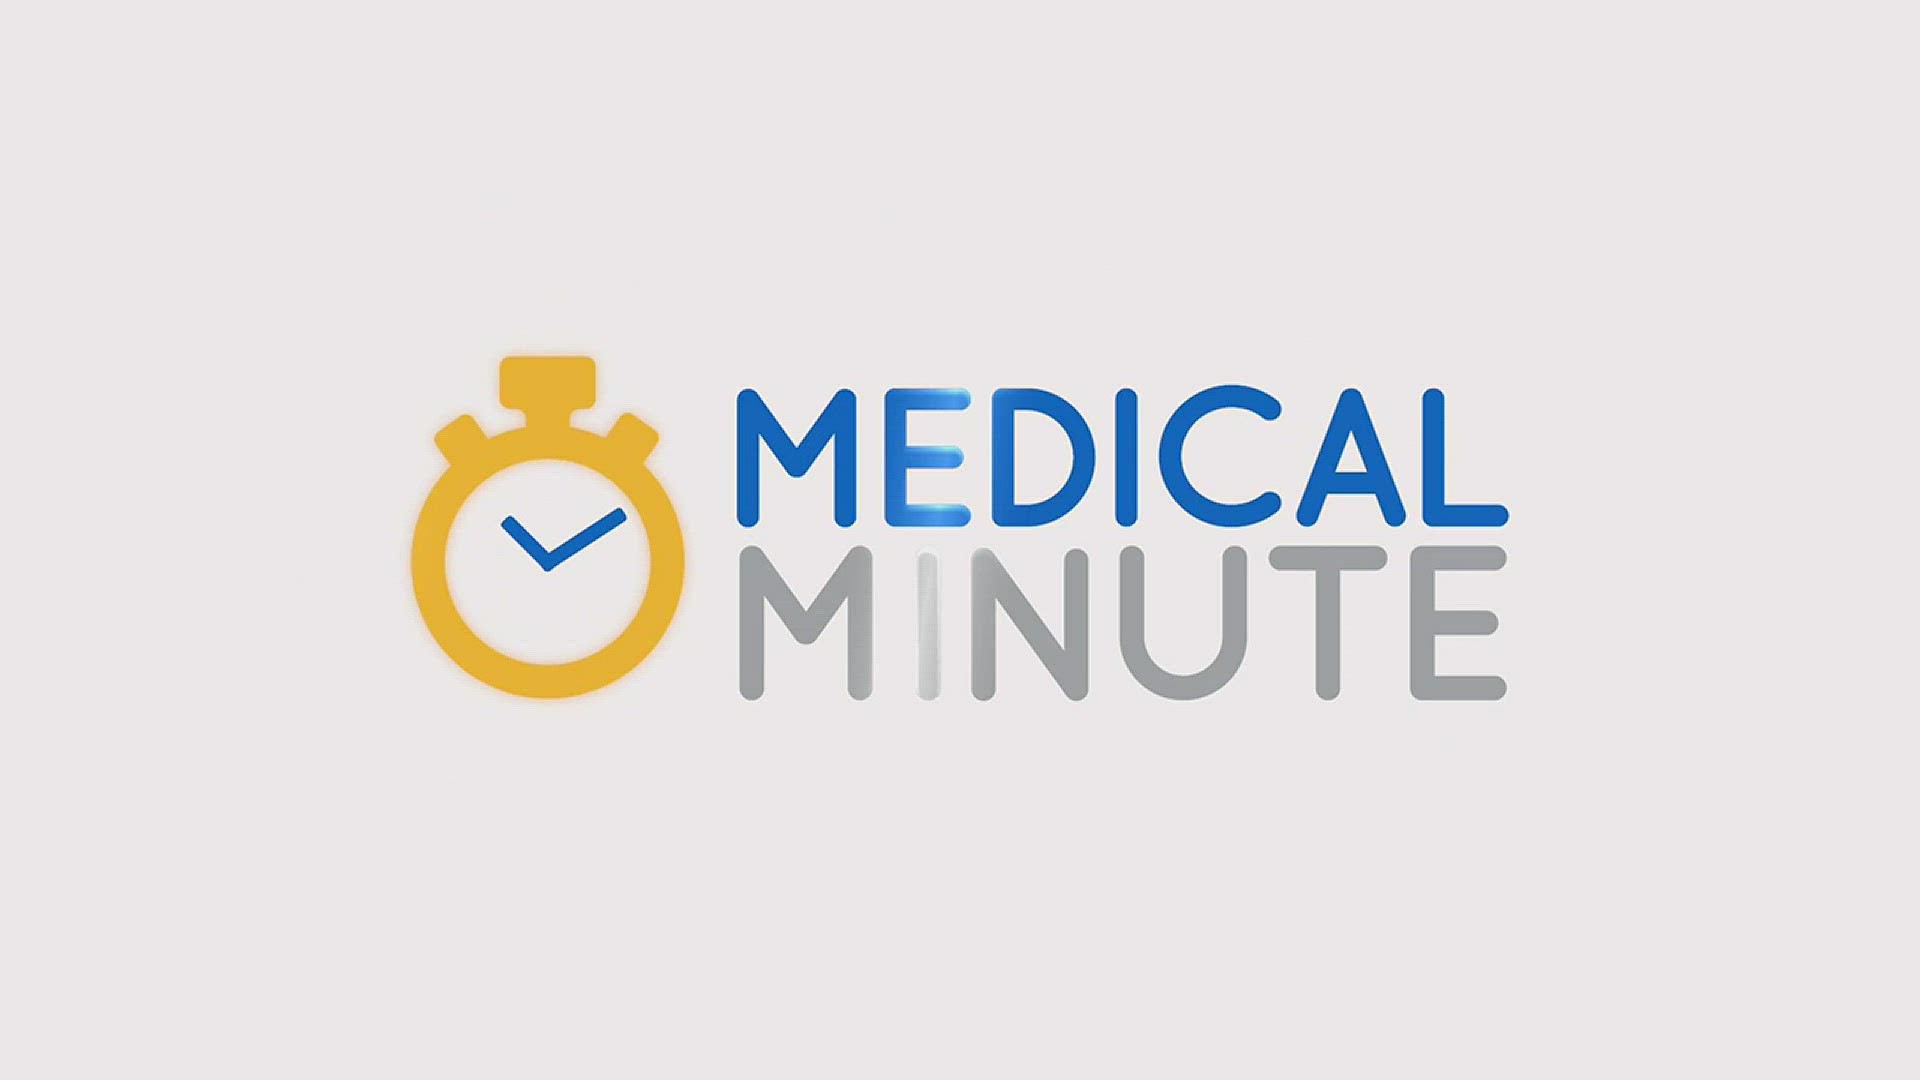 This month's WBIR Medical Minute focuses on Heart Health.